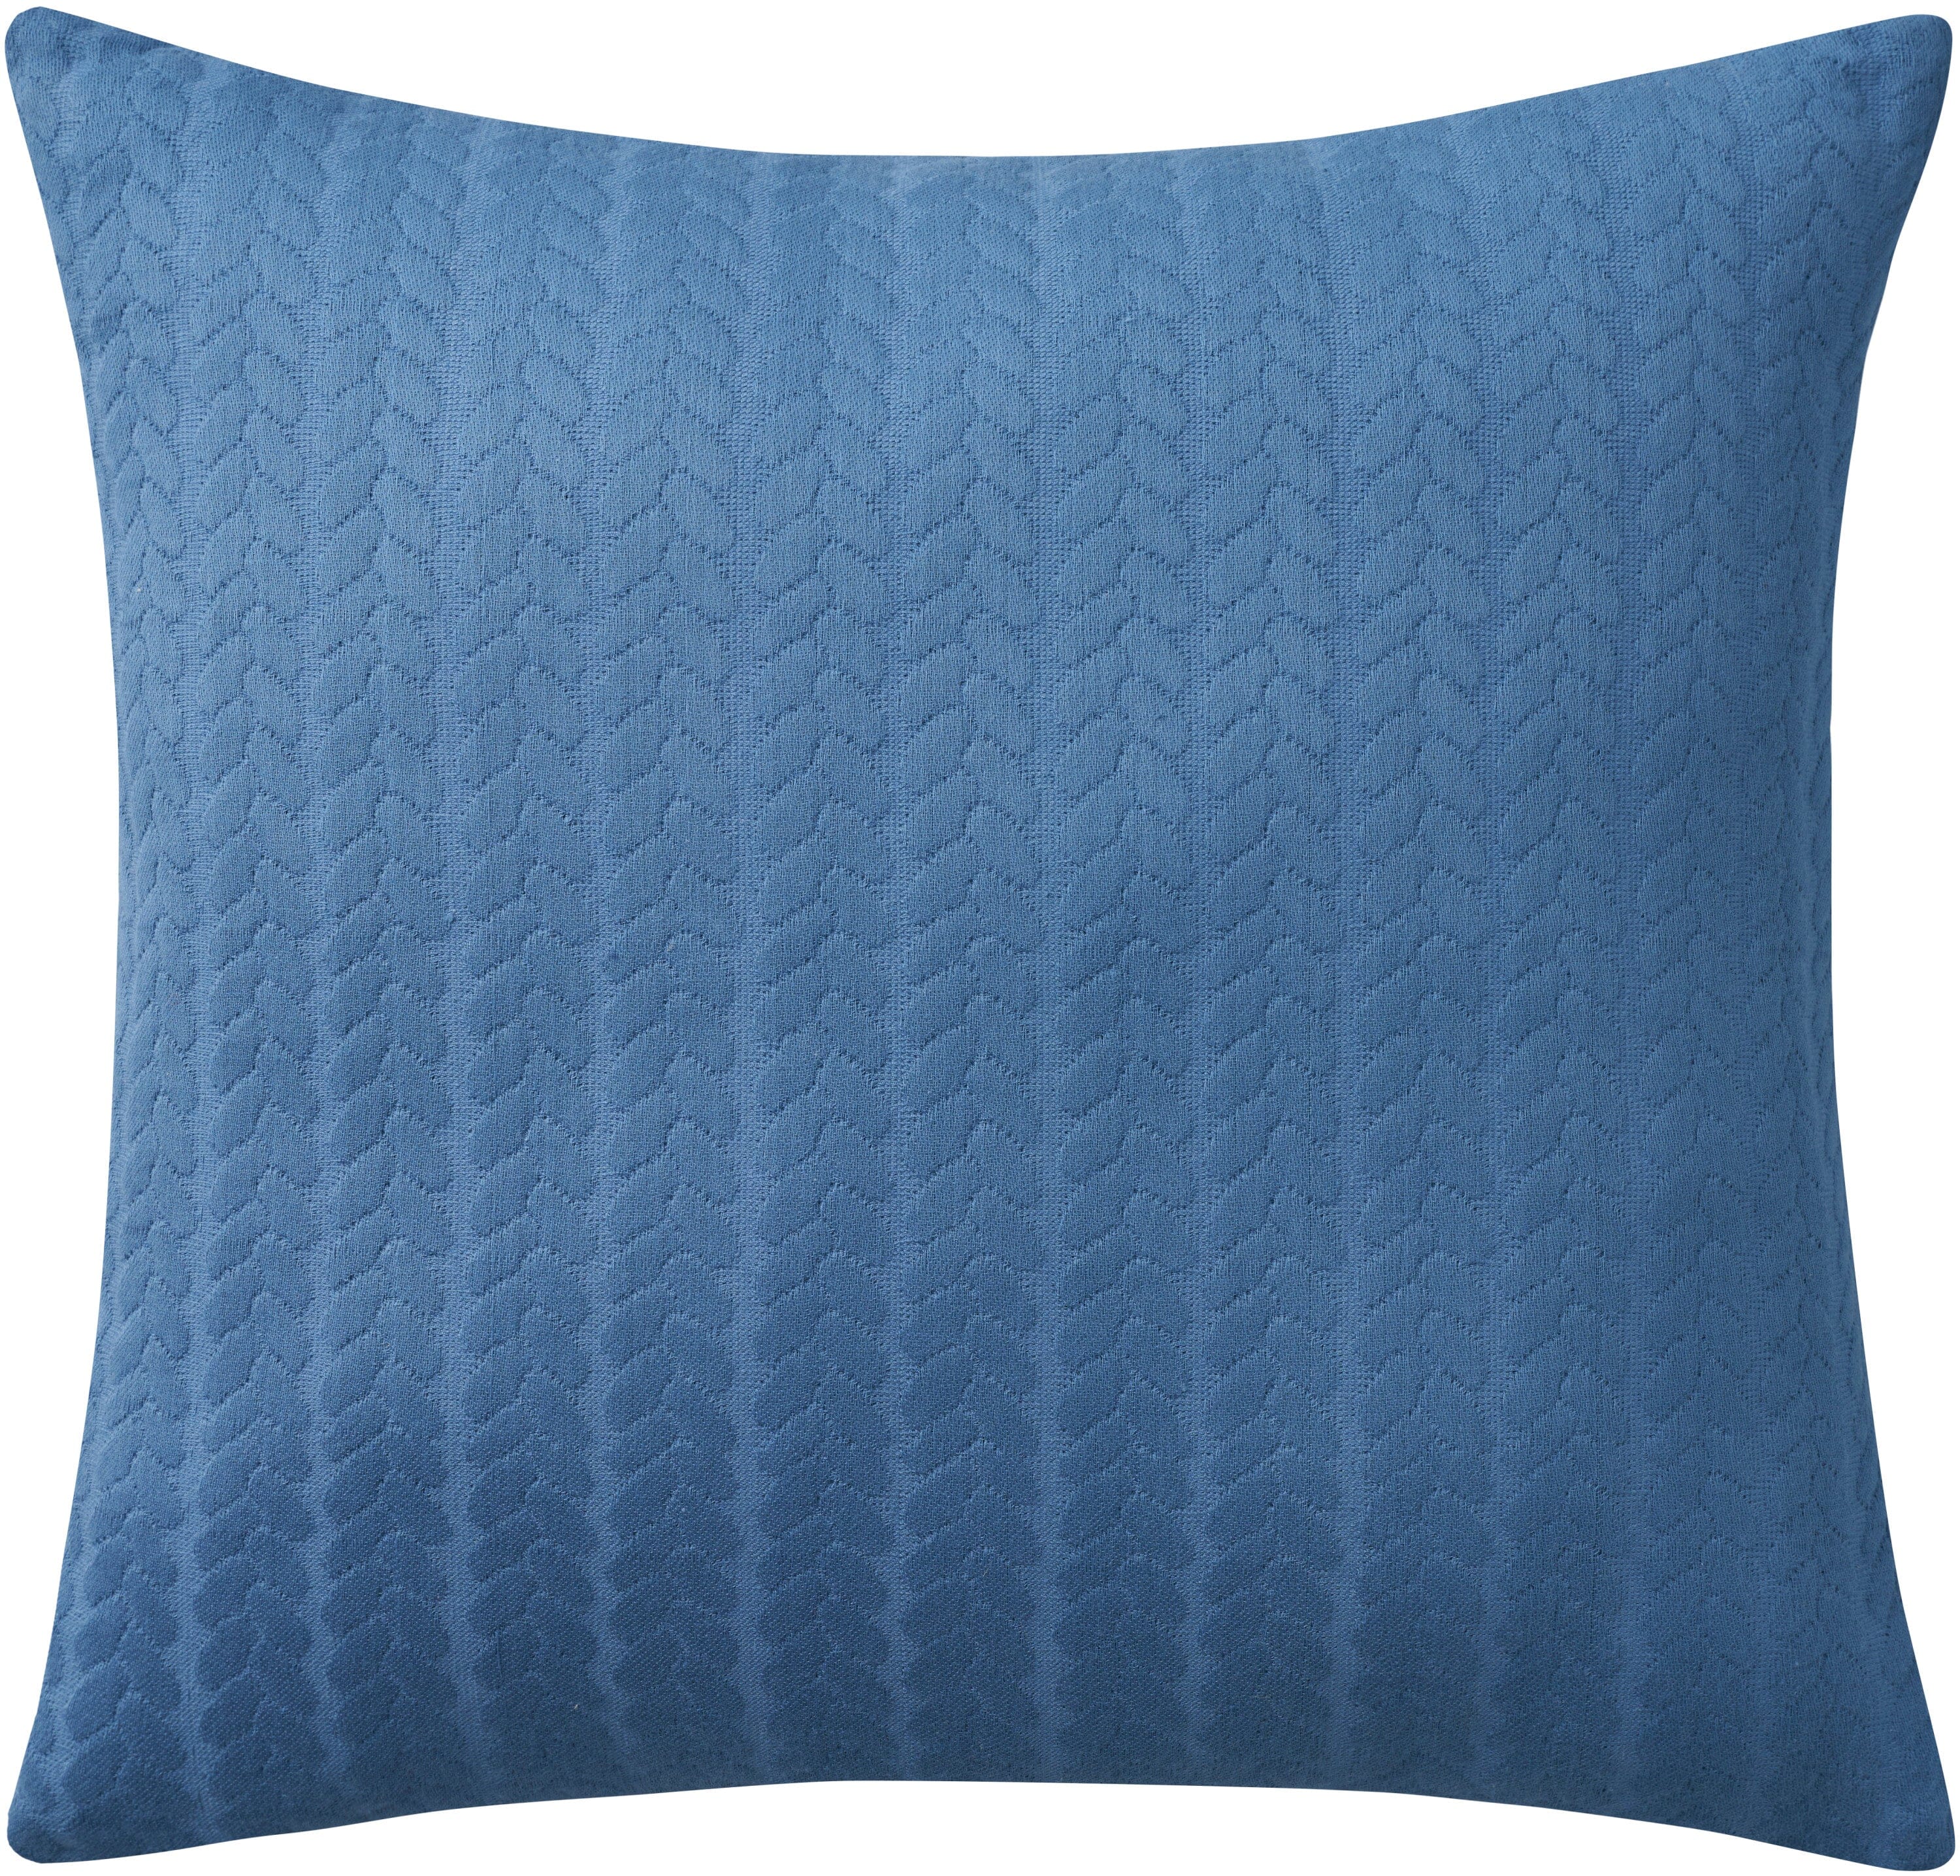 Mina Victory Cover Verticle Stripes 18" x 18" Blue Indoor Pillow Covers Mina Victory